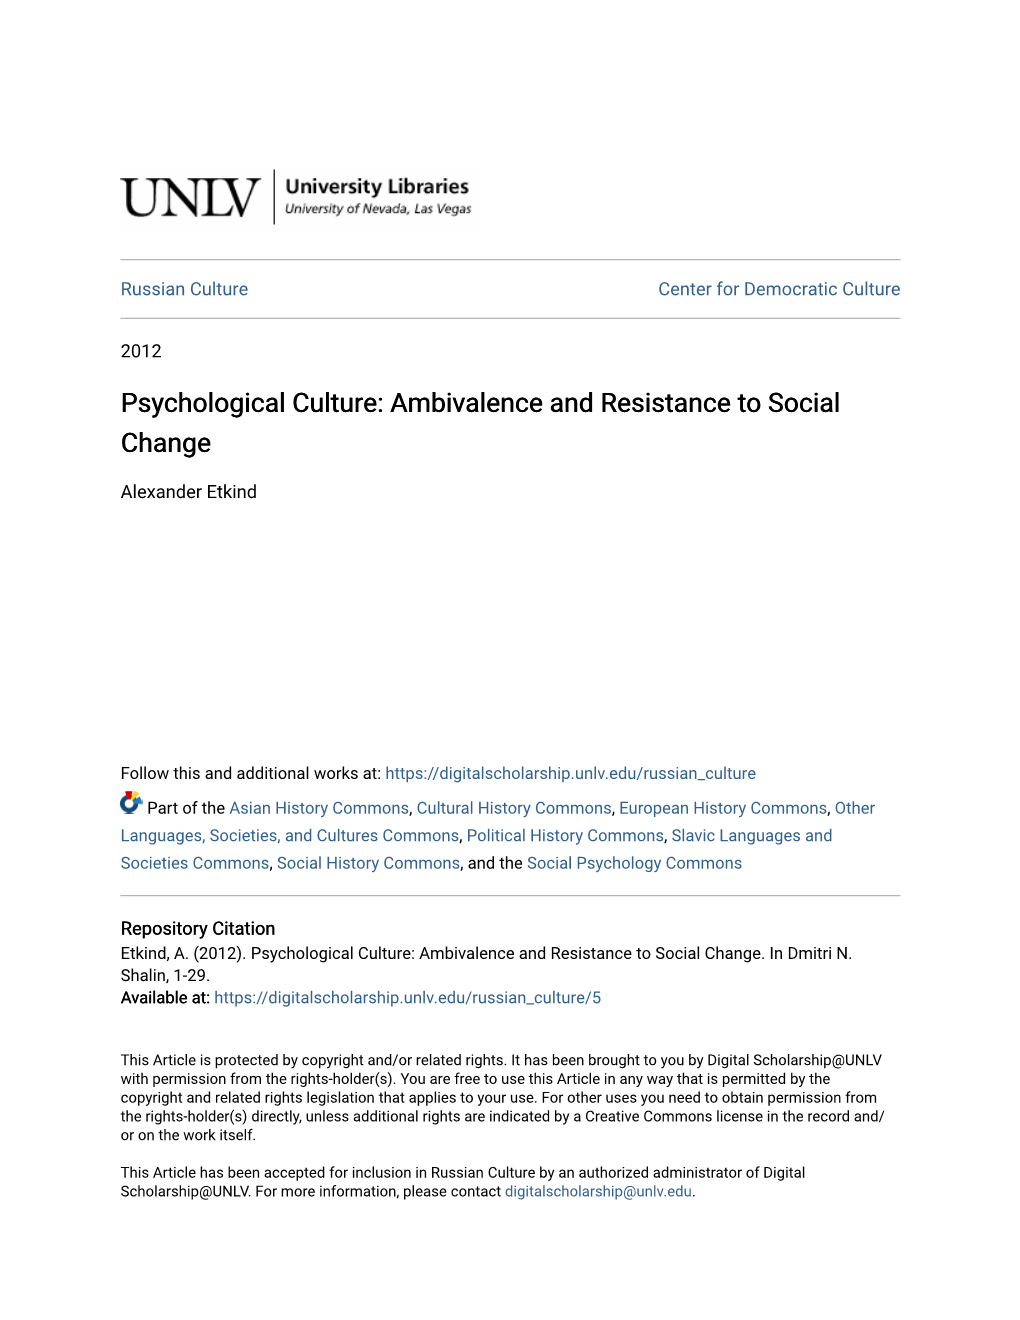 Psychological Culture: Ambivalence and Resistance to Social Change